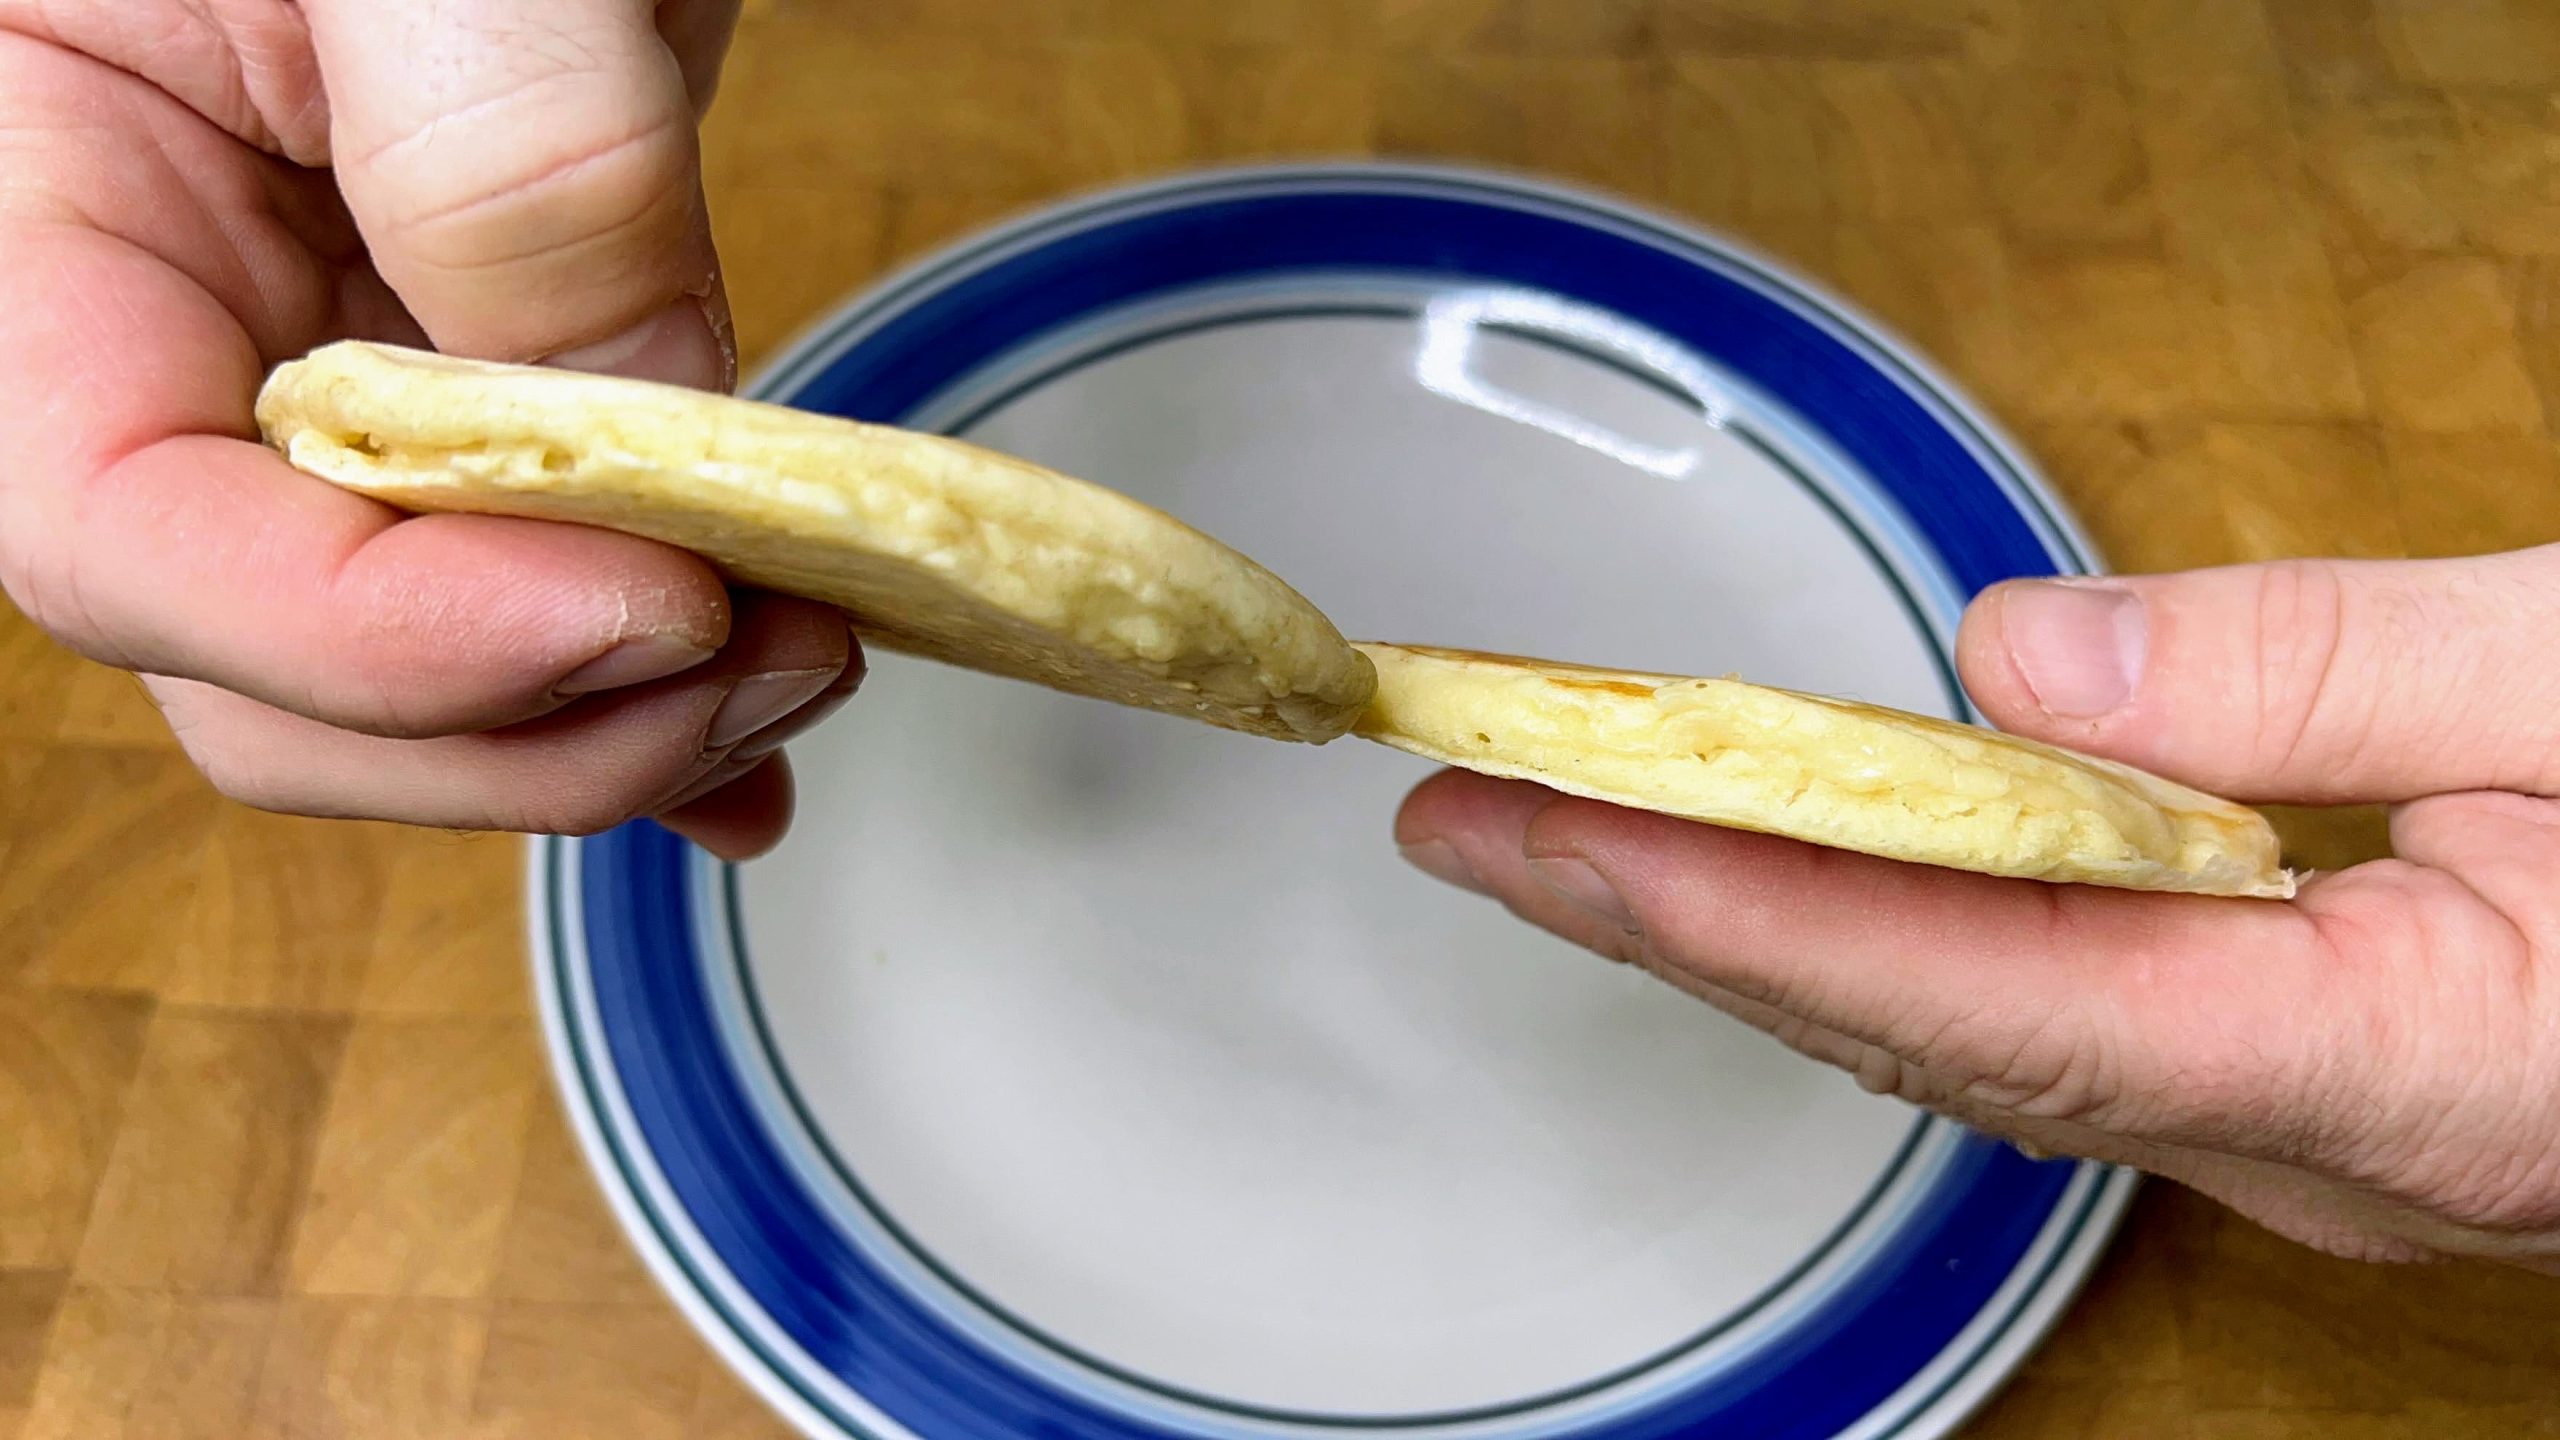 hands holding two pancakes. 
fresh pancake on left, pancake from defrosted batter on right